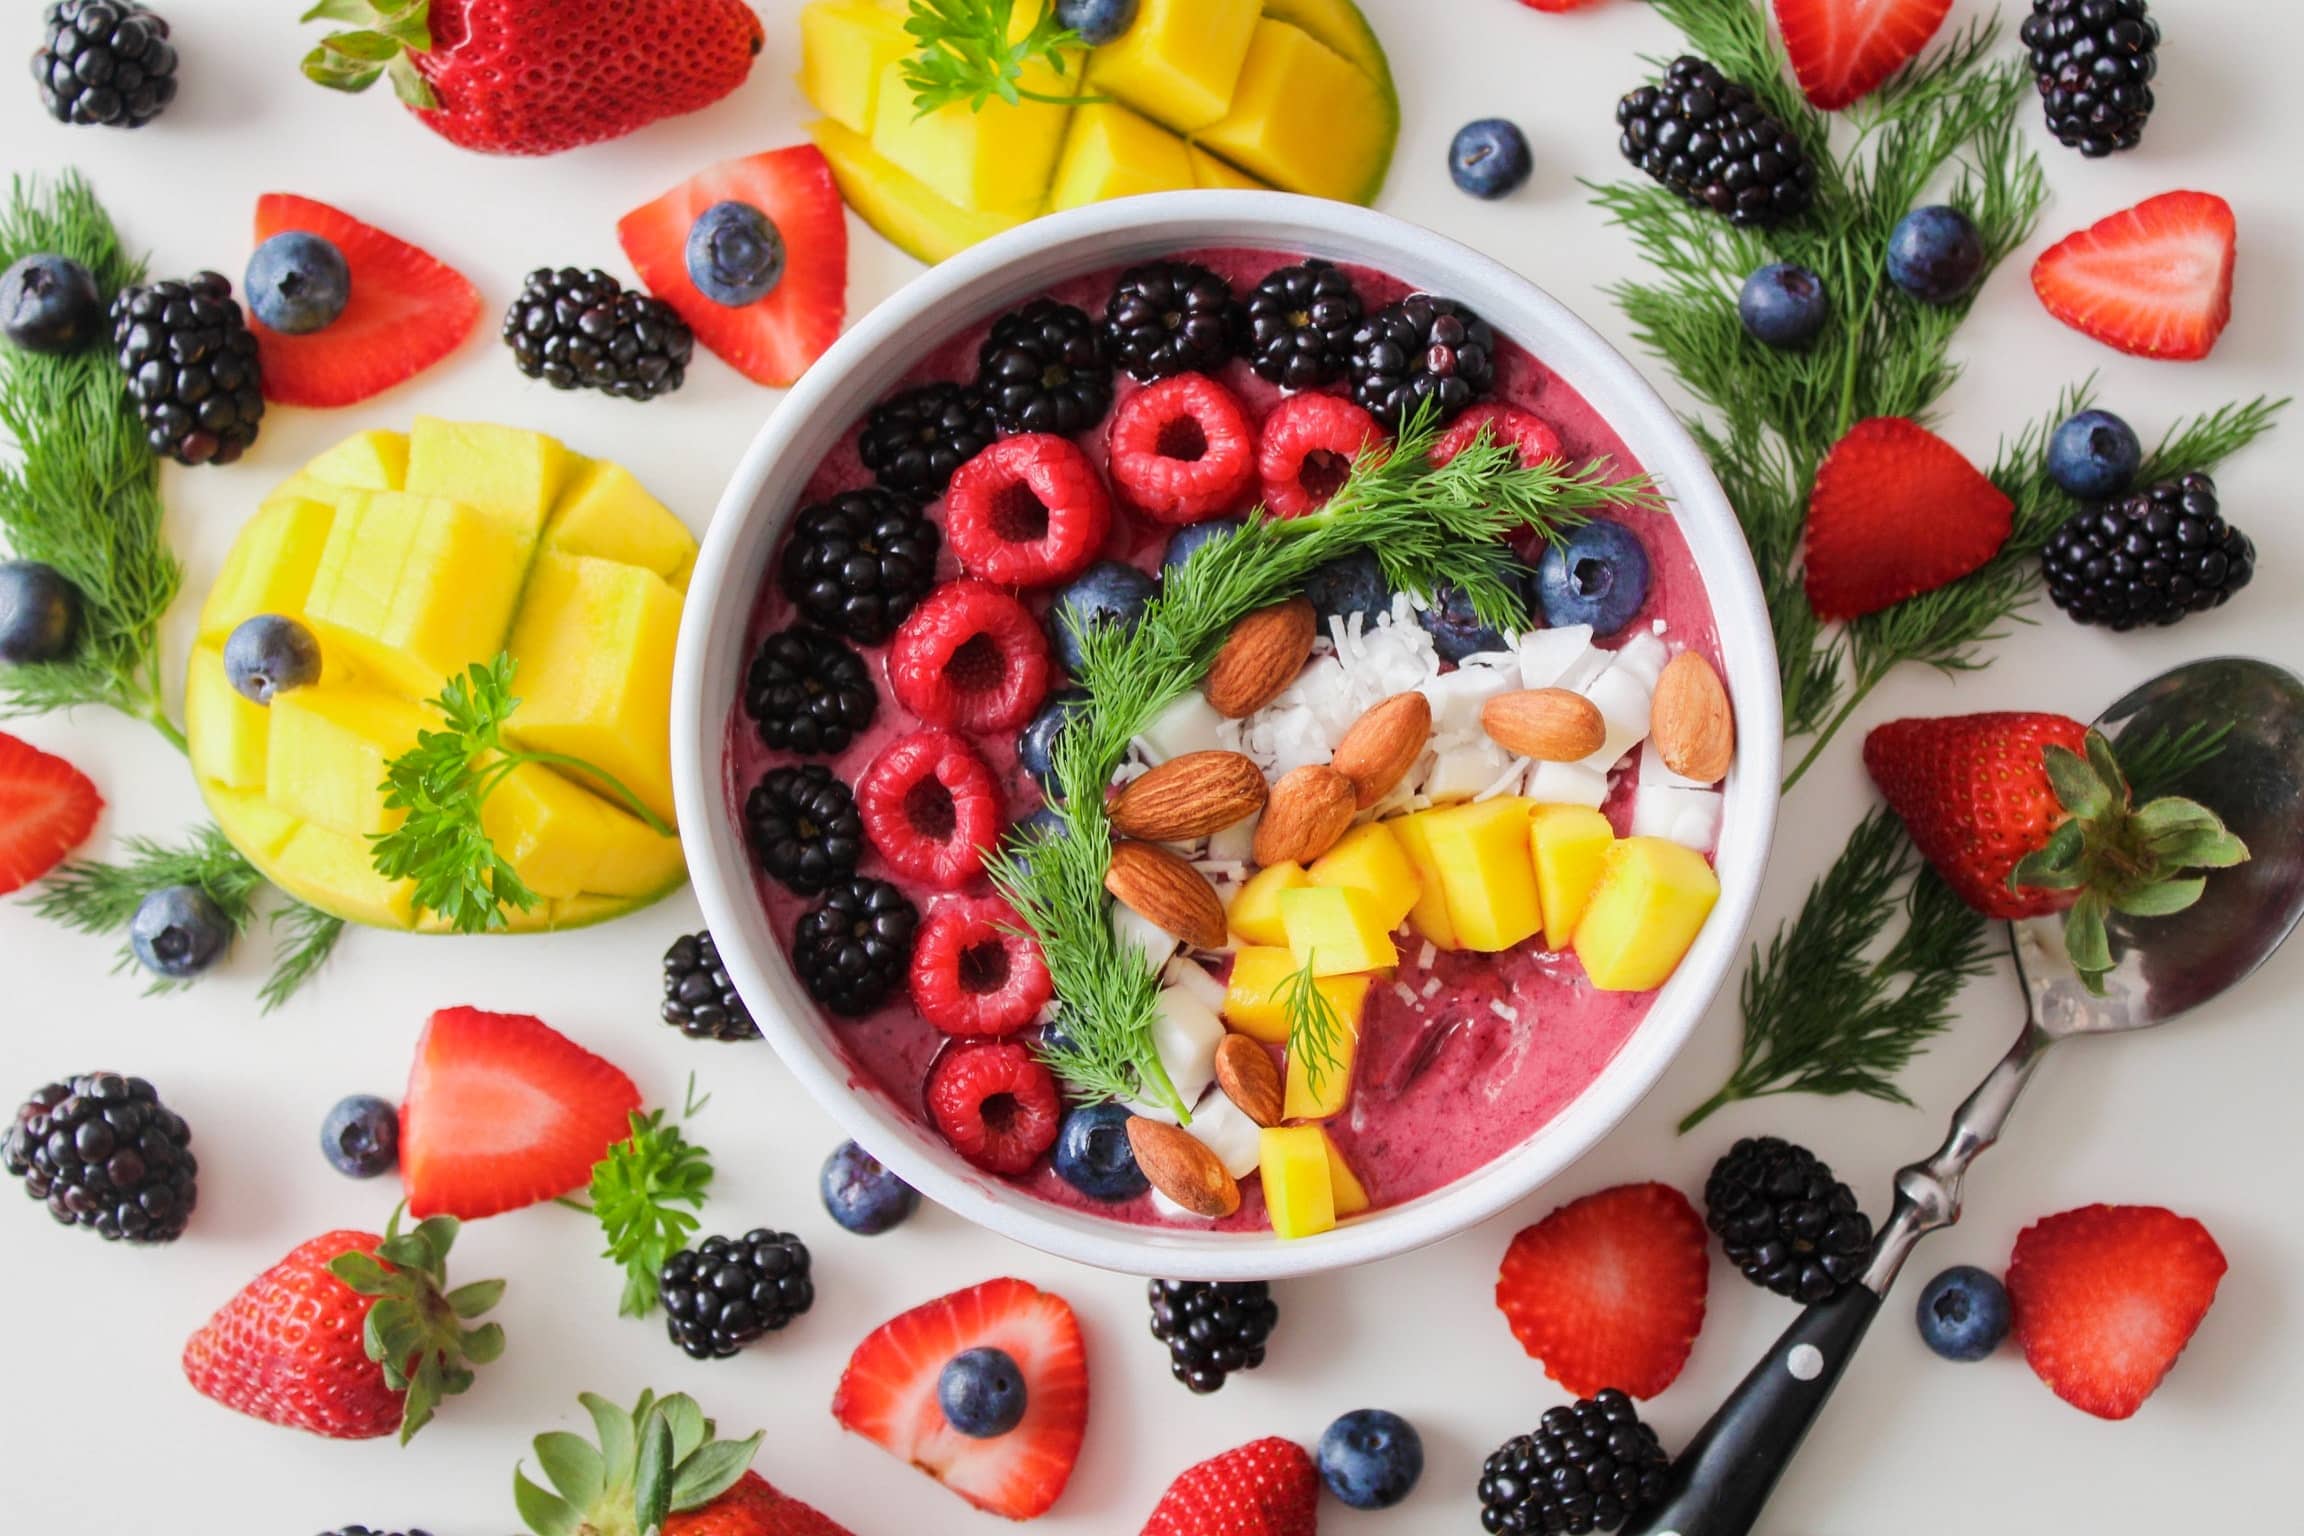 Smoothie bowl with a variety of berries, pineapple, almonds, and coconut. The smoothie bowl is surrounded by fruit.